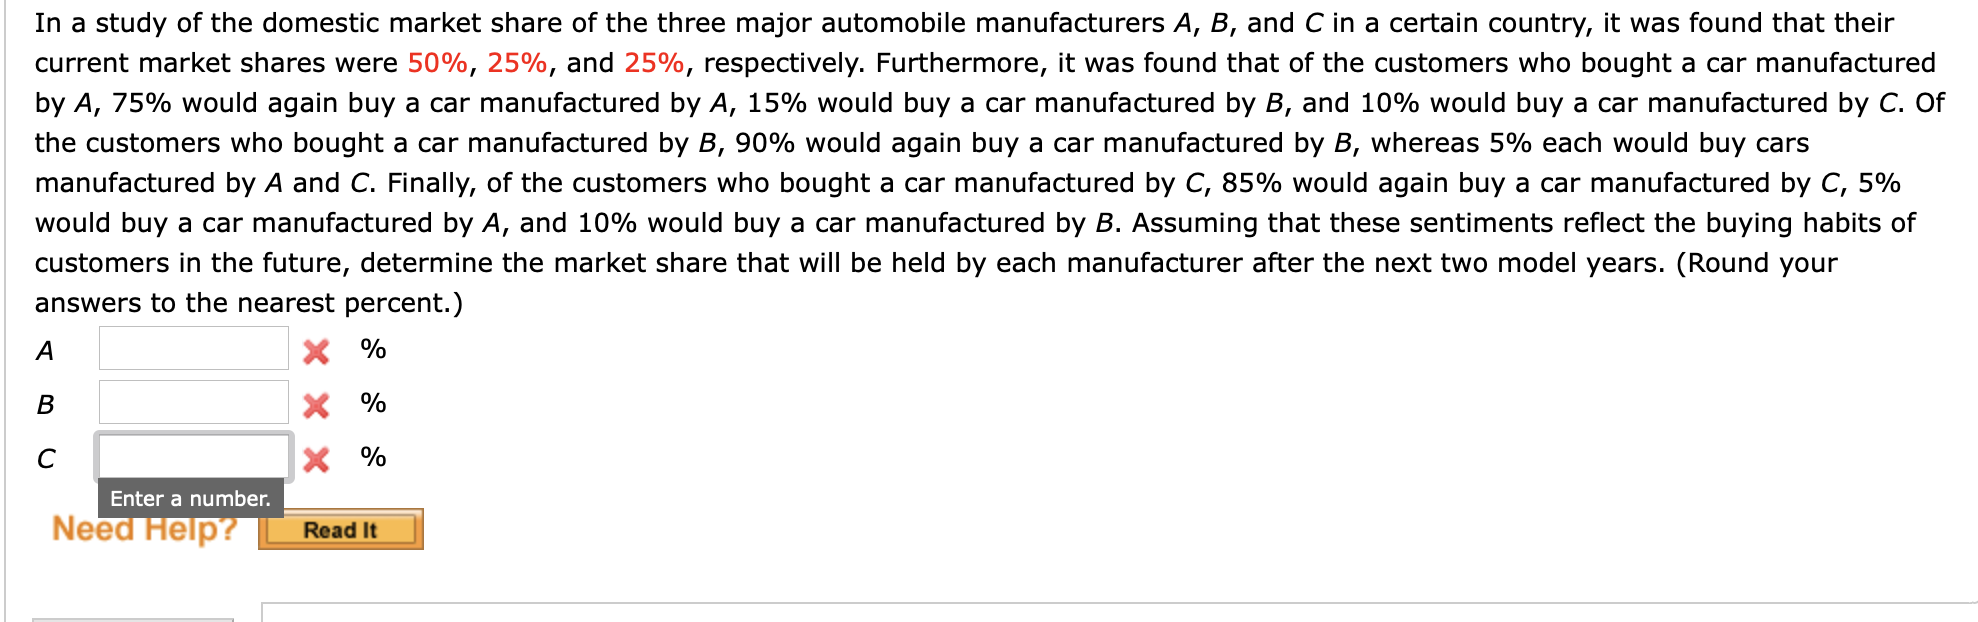 In a study of the domestic market share of the three major automobile manufacturers A, B, and C in a certain country, it was found that their
current market shares were 50%, 25%, and 25%, respectively. Furthermore, it was found that of the customers who bought a car manufactured
by A, 75% would again buy a car manufactured by A, 15% would buy a car manufactured by B, and 10% would buy a car manufactured by C. Of
the customers who bought a car manufactured by B, 90% would again buy a car manufactured by B, whereas 5% each would buy cars
manufactured by A and C. Finally, of the customers who bought a car manufactured by C, 85% would again buy a car manufactured by C, 5%
would buy a car manufactured by A, and 10% would buy a car manufactured by B. Assuming that these sentiments reflect the buying habits of
customers in the future, determine the market share that will be held by each manufacturer after the next two model years. (Round your
answers to the nearest percent.)
A
X %
В
X %
X %
Enter a number.
Need Help?
Read It
